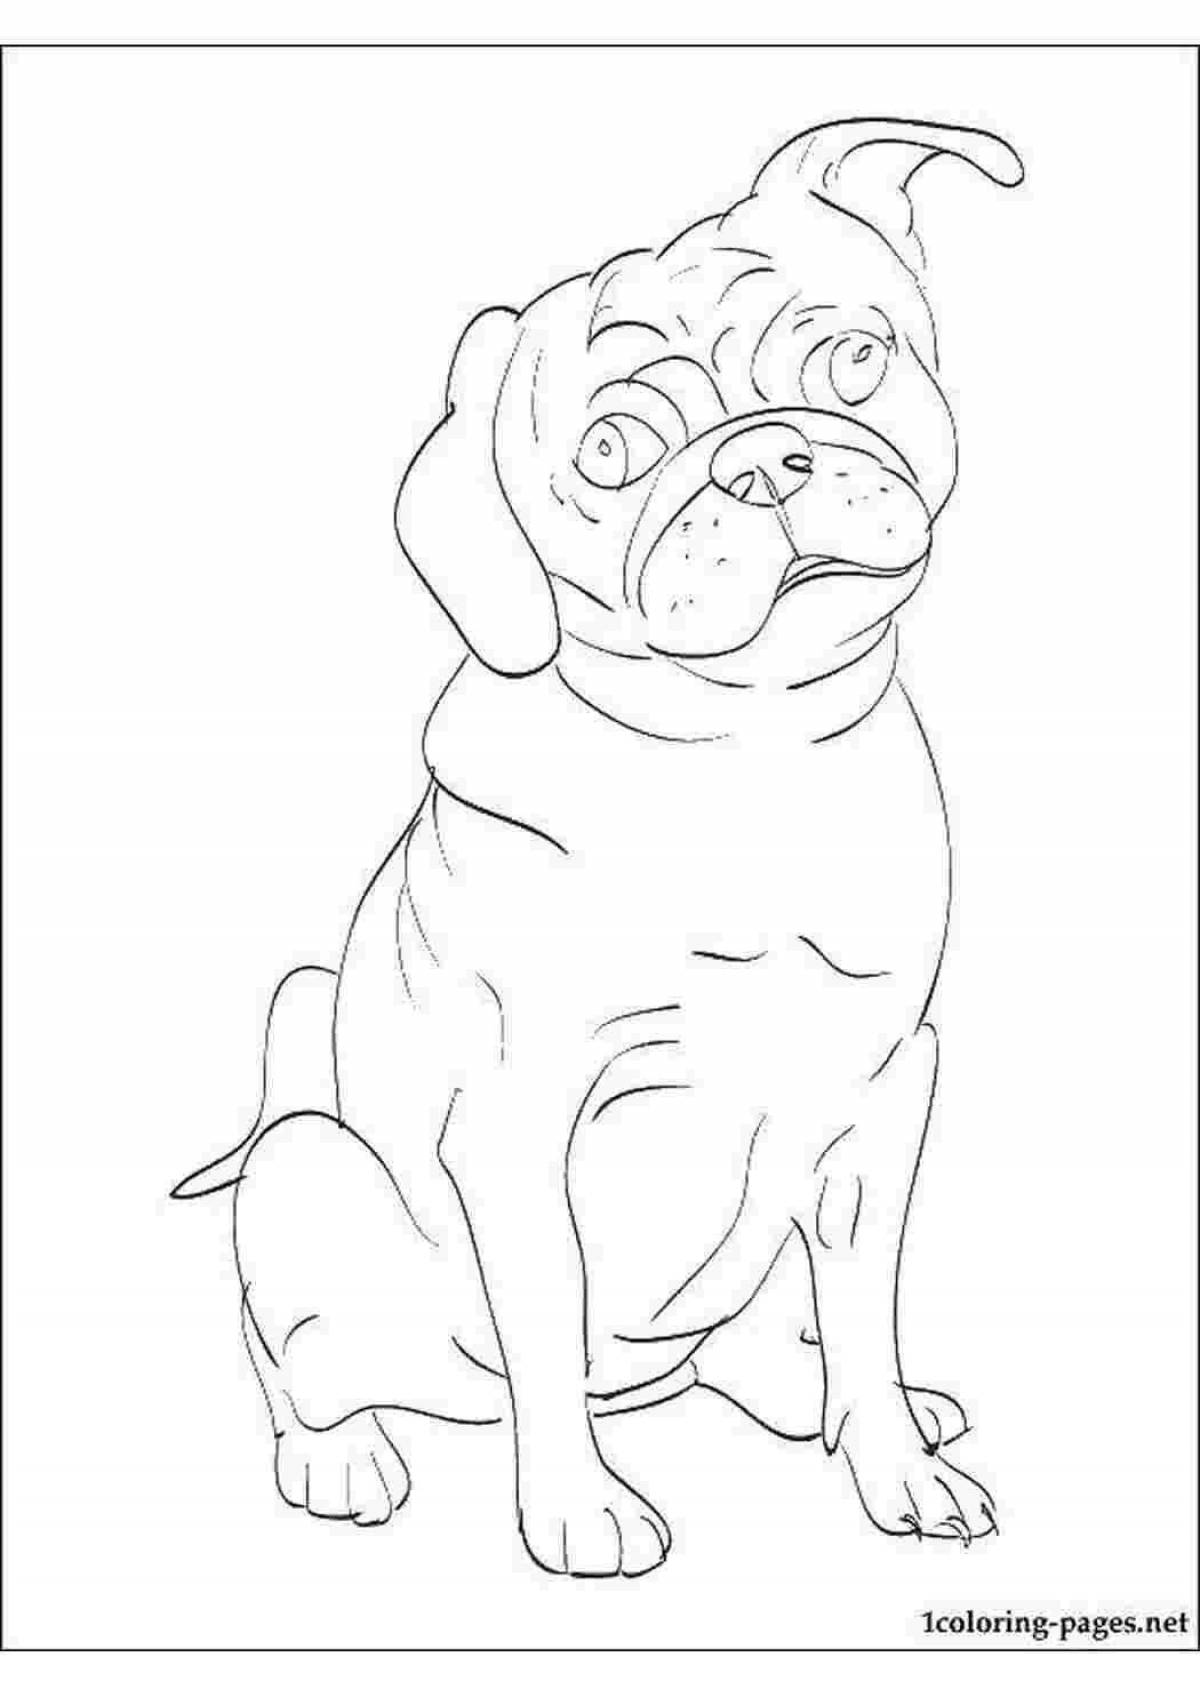 Cute pug coloring page for kids